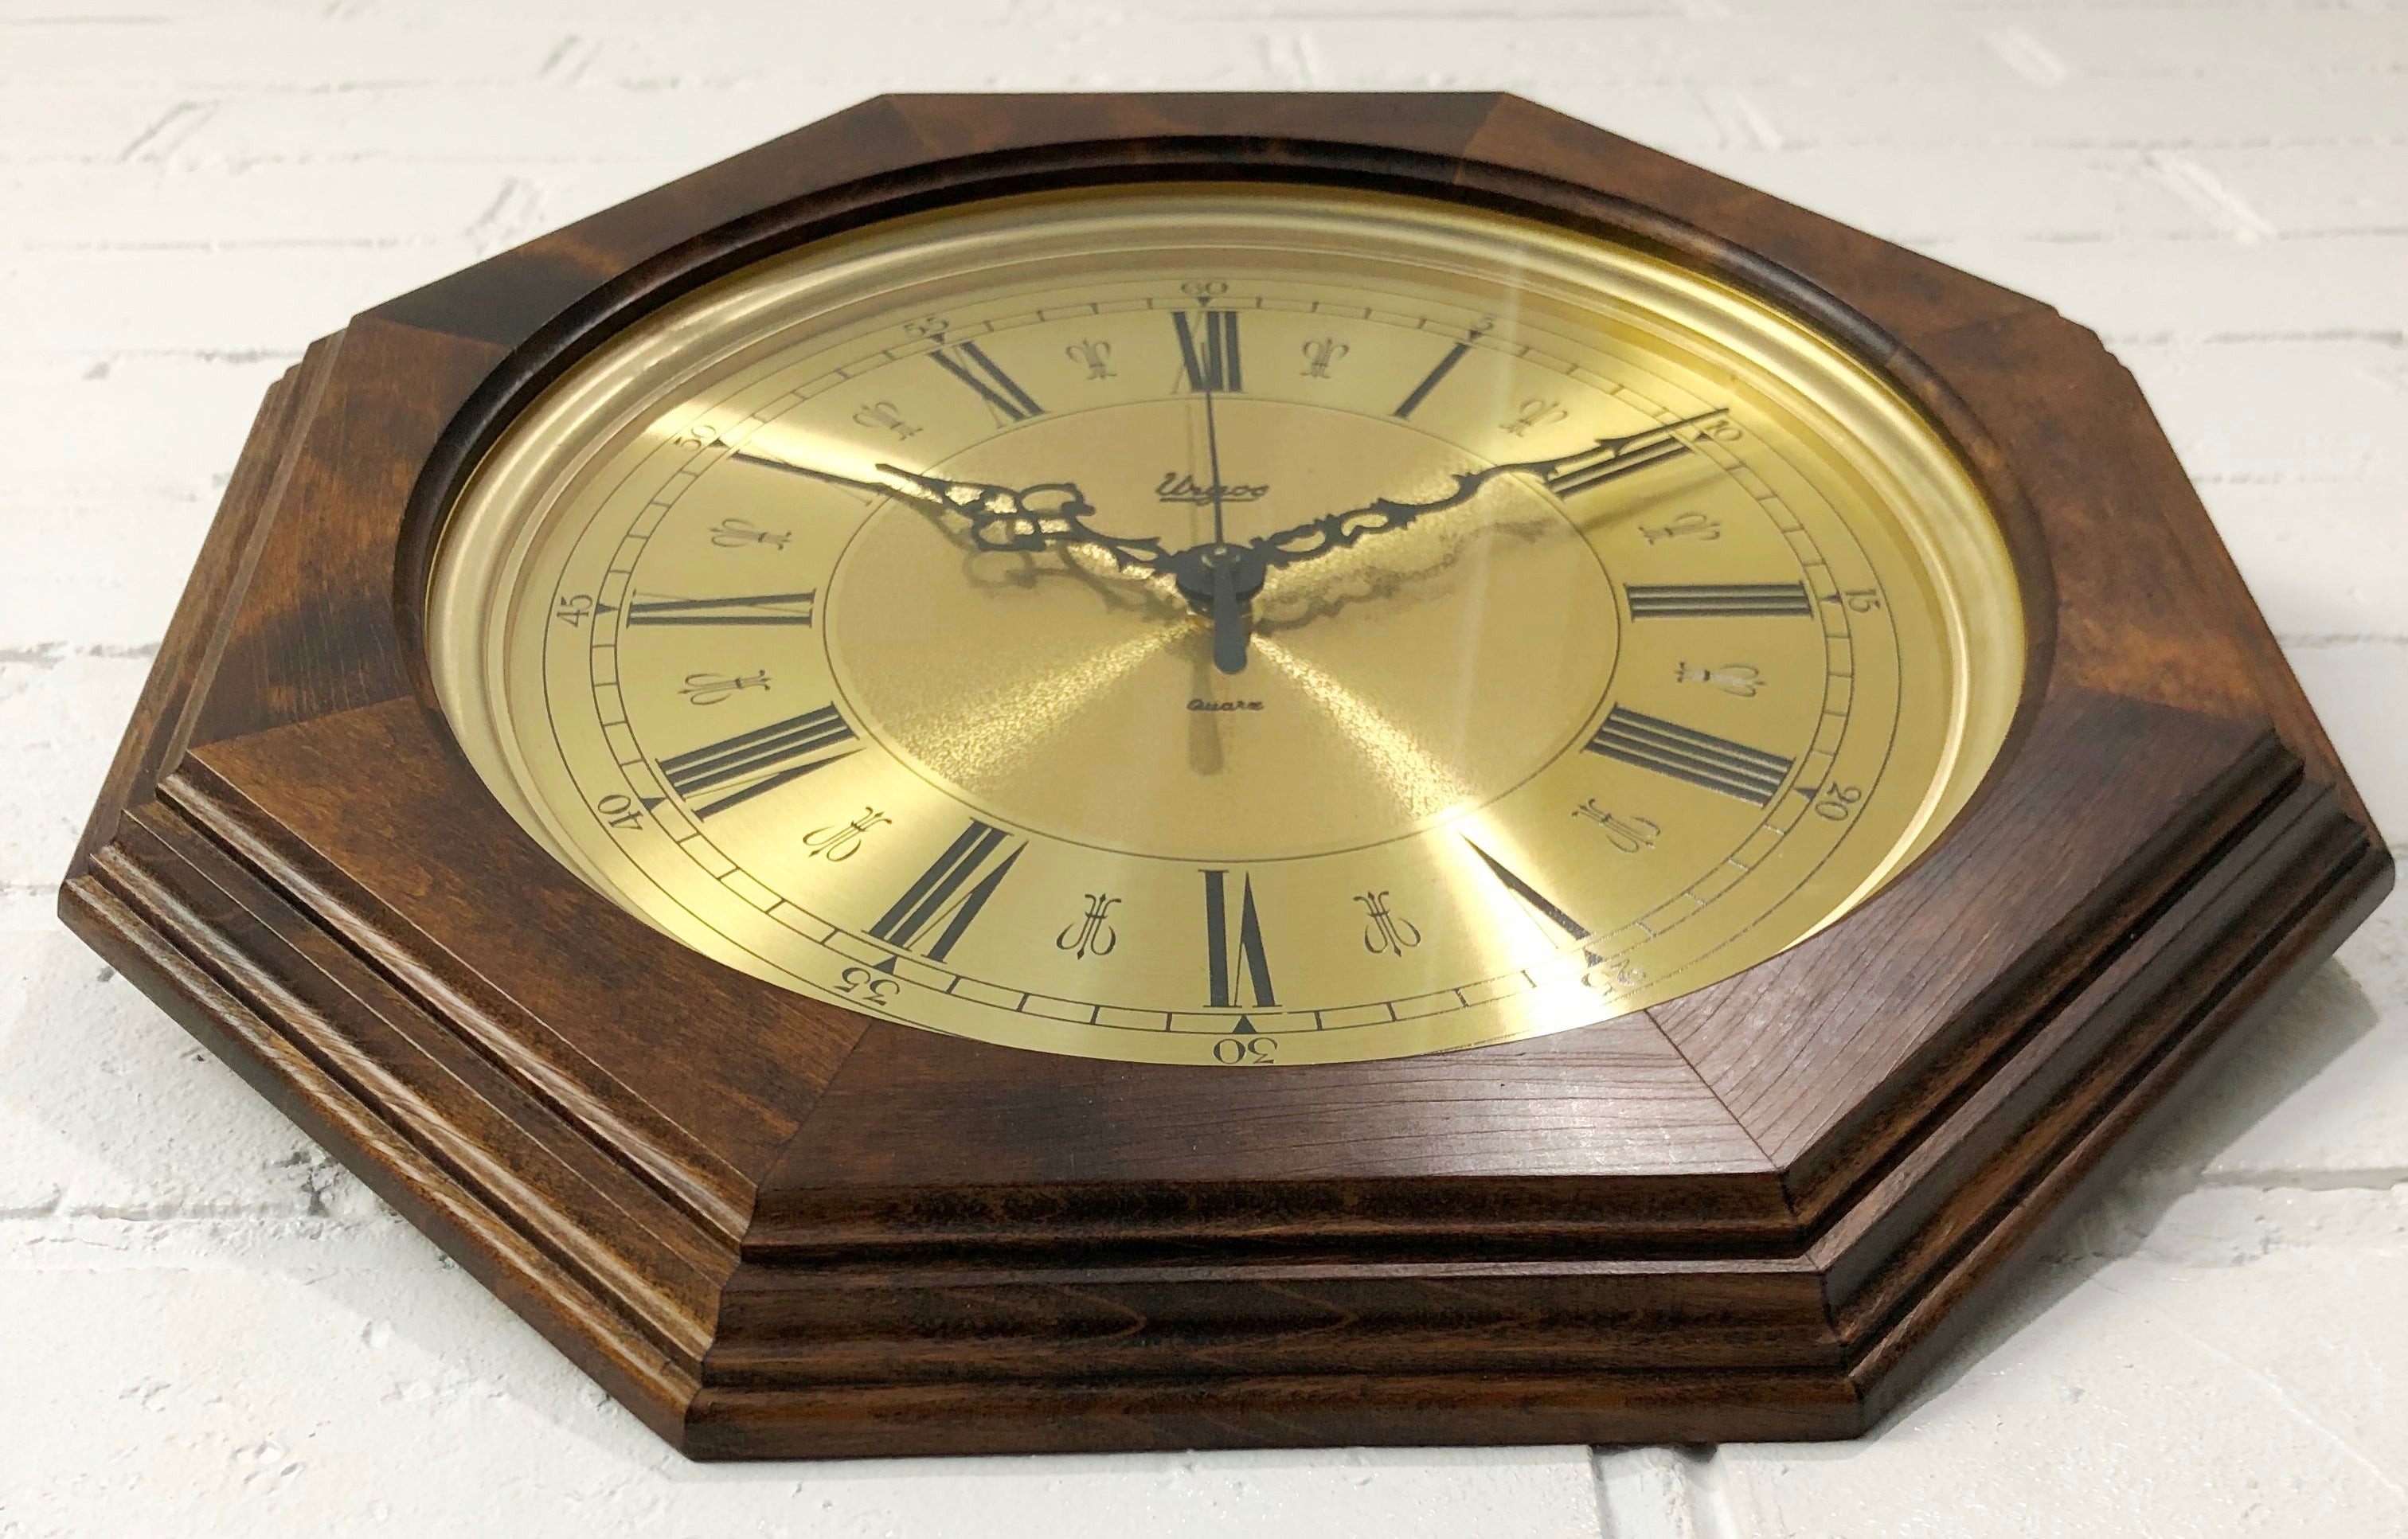 Vintage URGOS Octagon Wood Grained Battery Wall Clock | eXibit collection